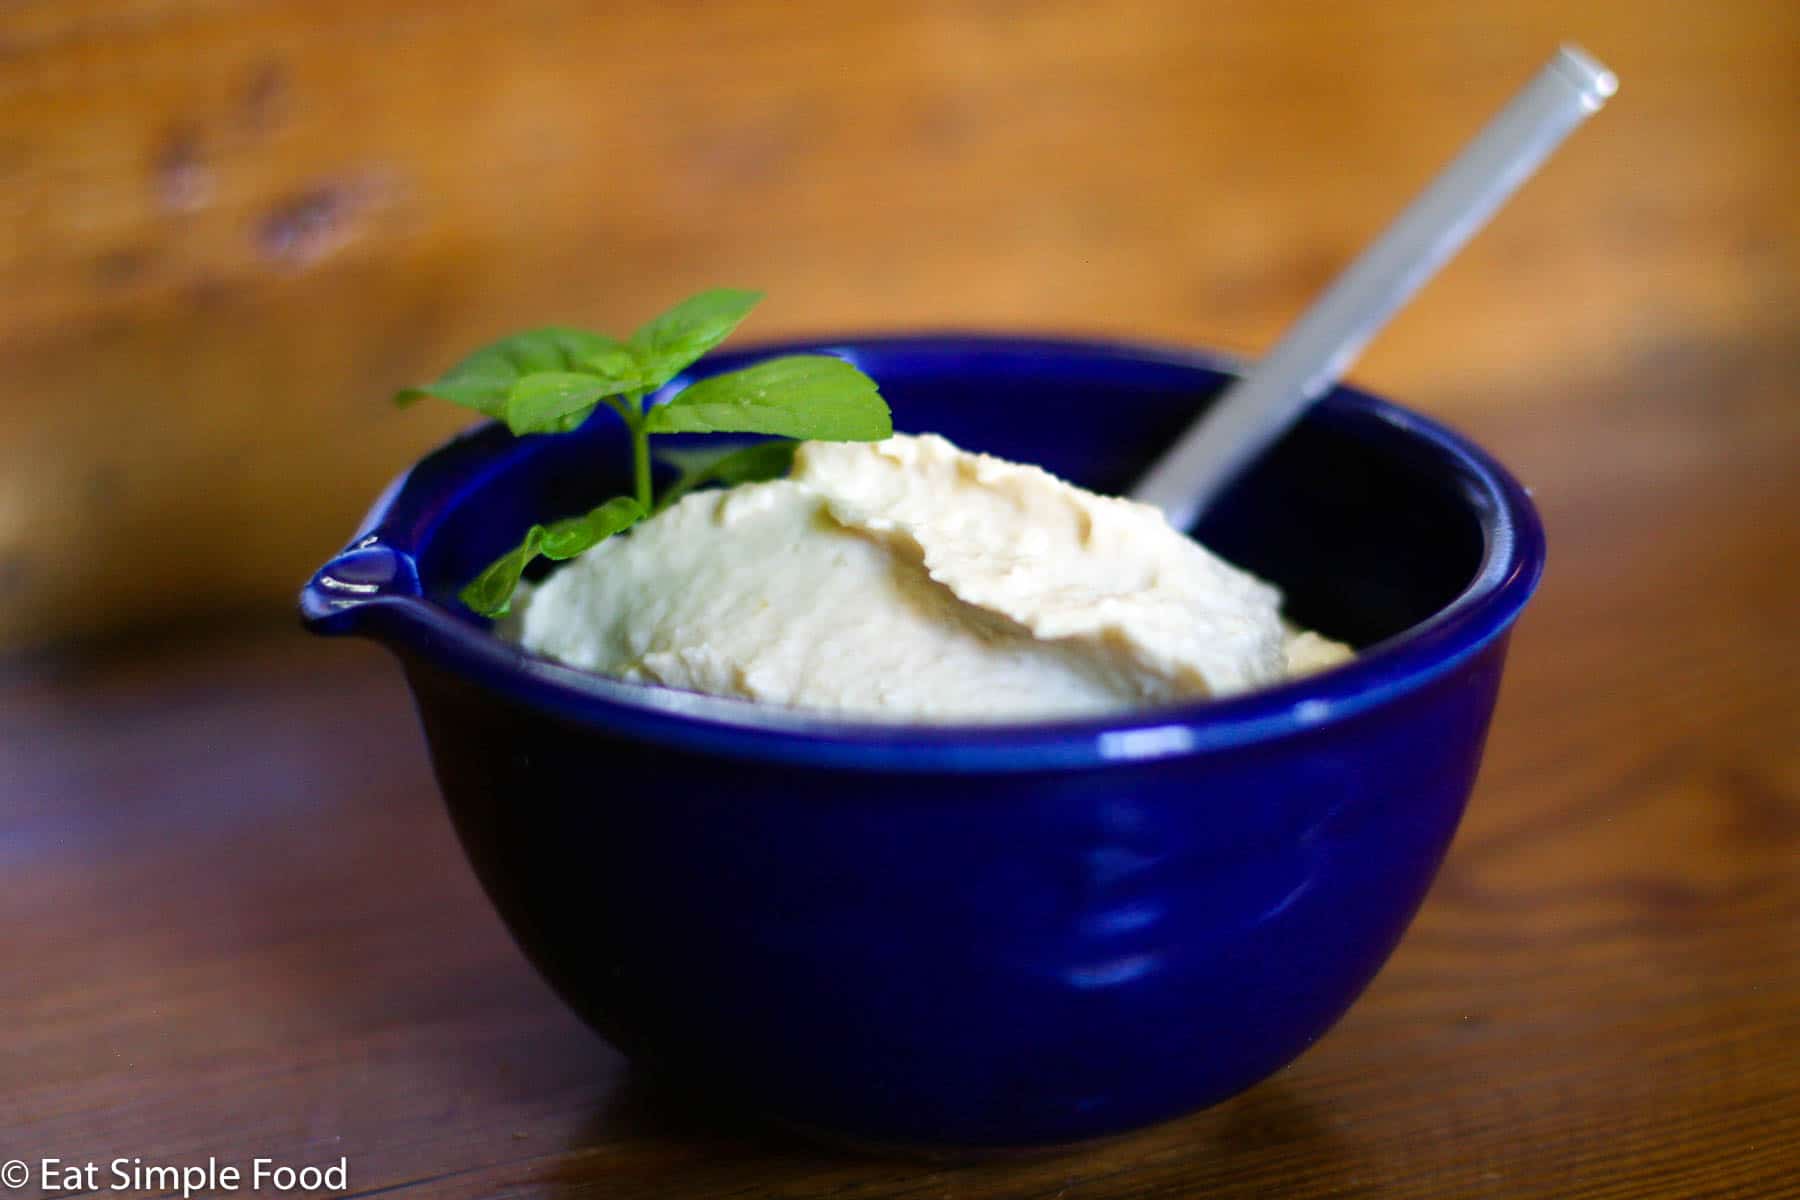 Small blue bowl of off white hummus with a mint garnish. Spoon inserted into hummus.